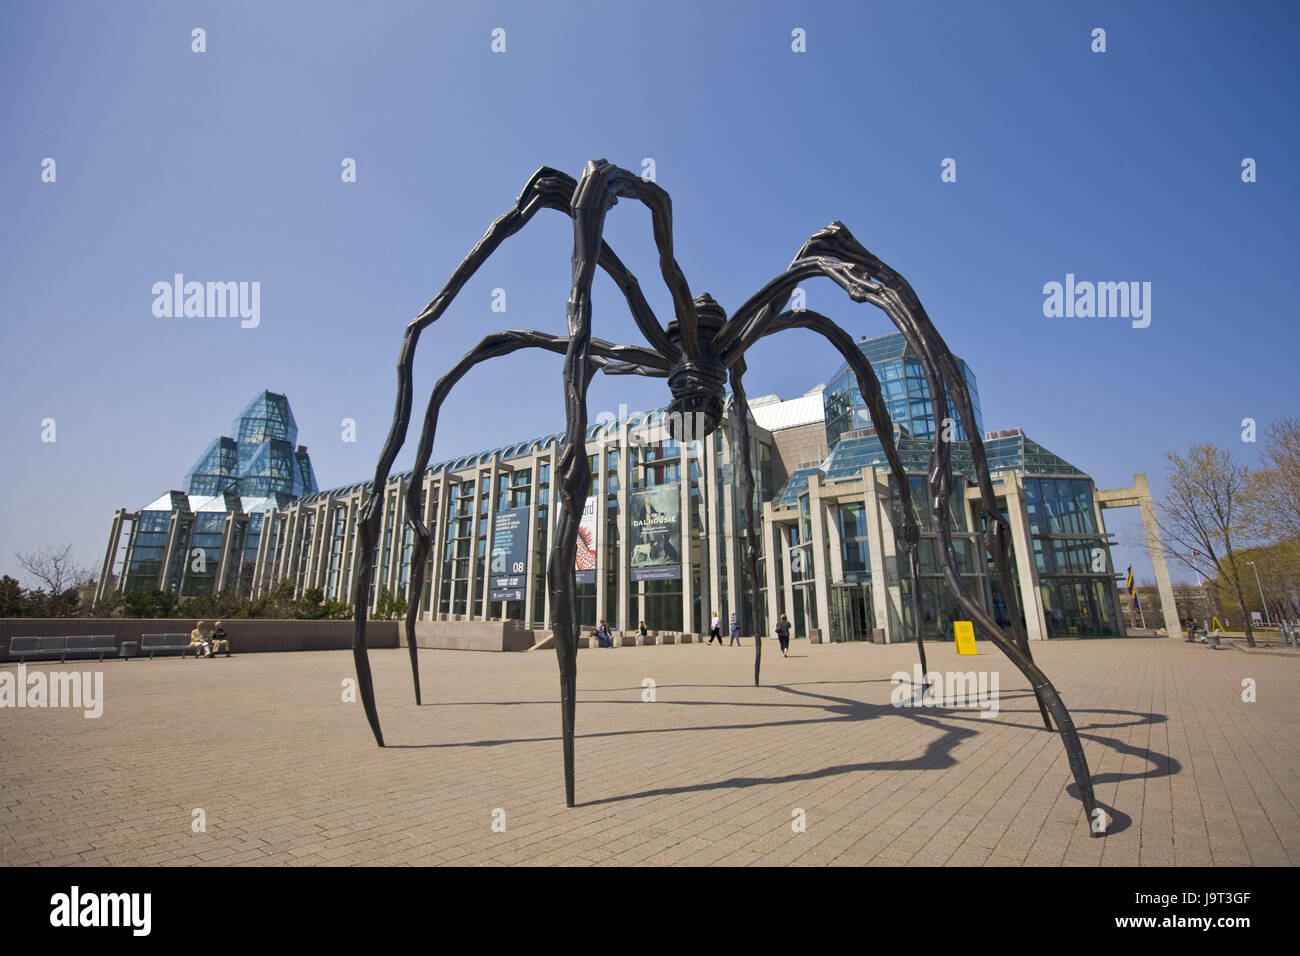 Canada,Ontario,Ottawa,national gallery,forecourt,art object,spider,'Maman',North America,town,capital,place of interest,tourism,travel,square,art,St. of art,bronze,bronze spider,building,structure,landmark,gallery,culture,facade,outside,architecture,glass dome, Stock Photo